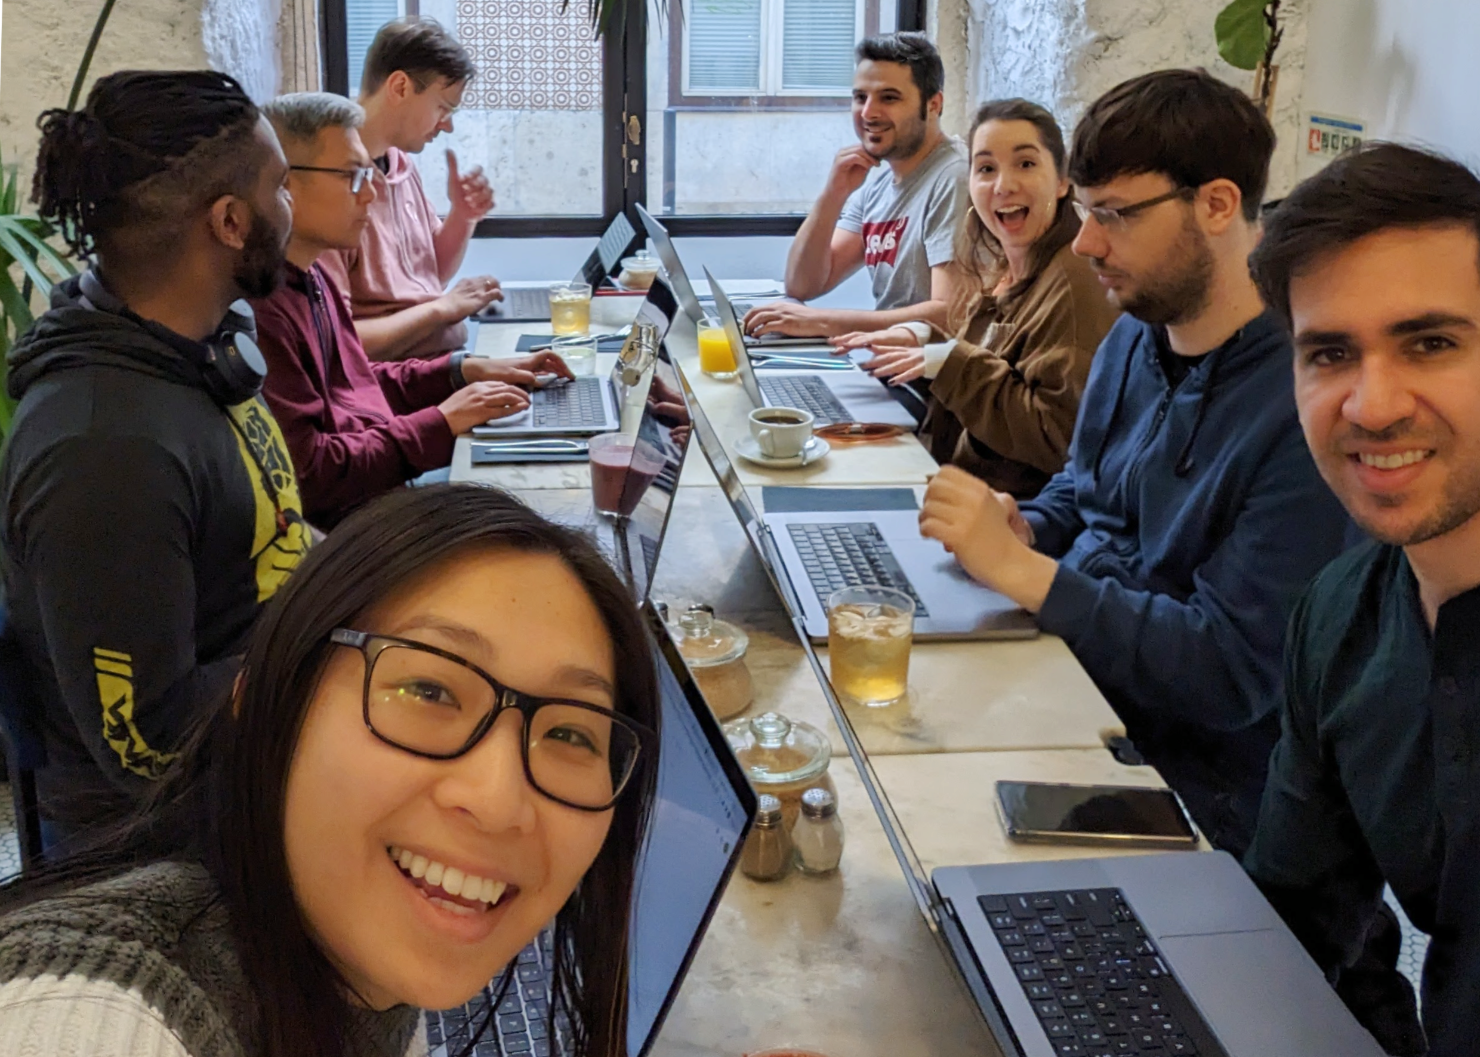 Jenny takes a selfie including the team all sitting at a long table in a room with stone and Portuguese tiled walls with laptops, coffees, and juices. David, Mateusz, Laura, Farzad, Anders, Kevin, and Gavin are all working, looking at the camera, or chatting to each other.